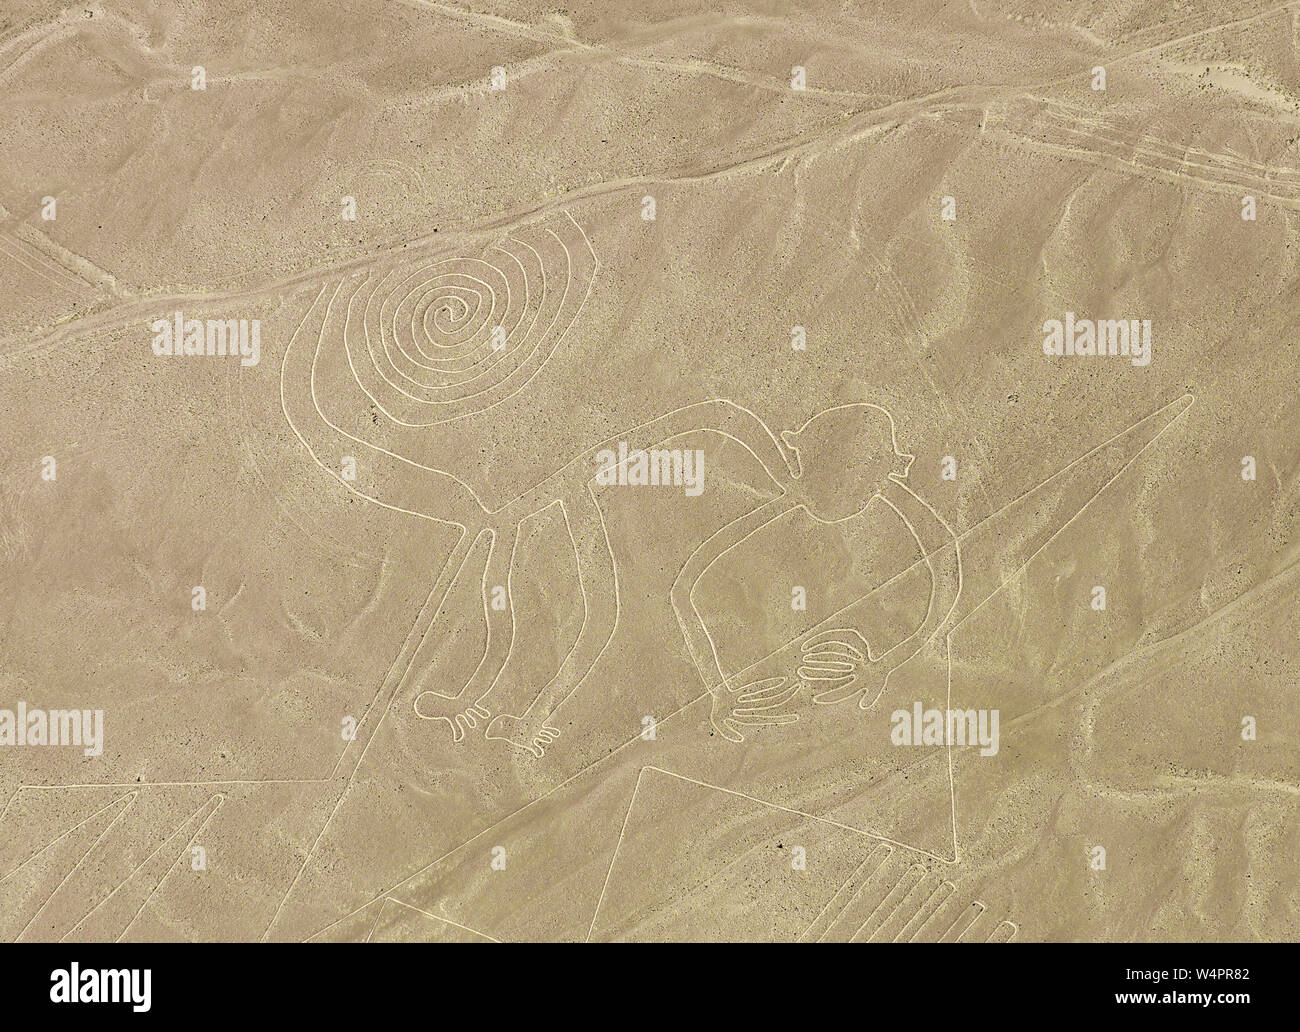 The monkey geoglyph and archaeological drawing design in the coastal desert of Peru known as the mysterious Nazca Lines near the city of Nazca, Peru. Stock Photo